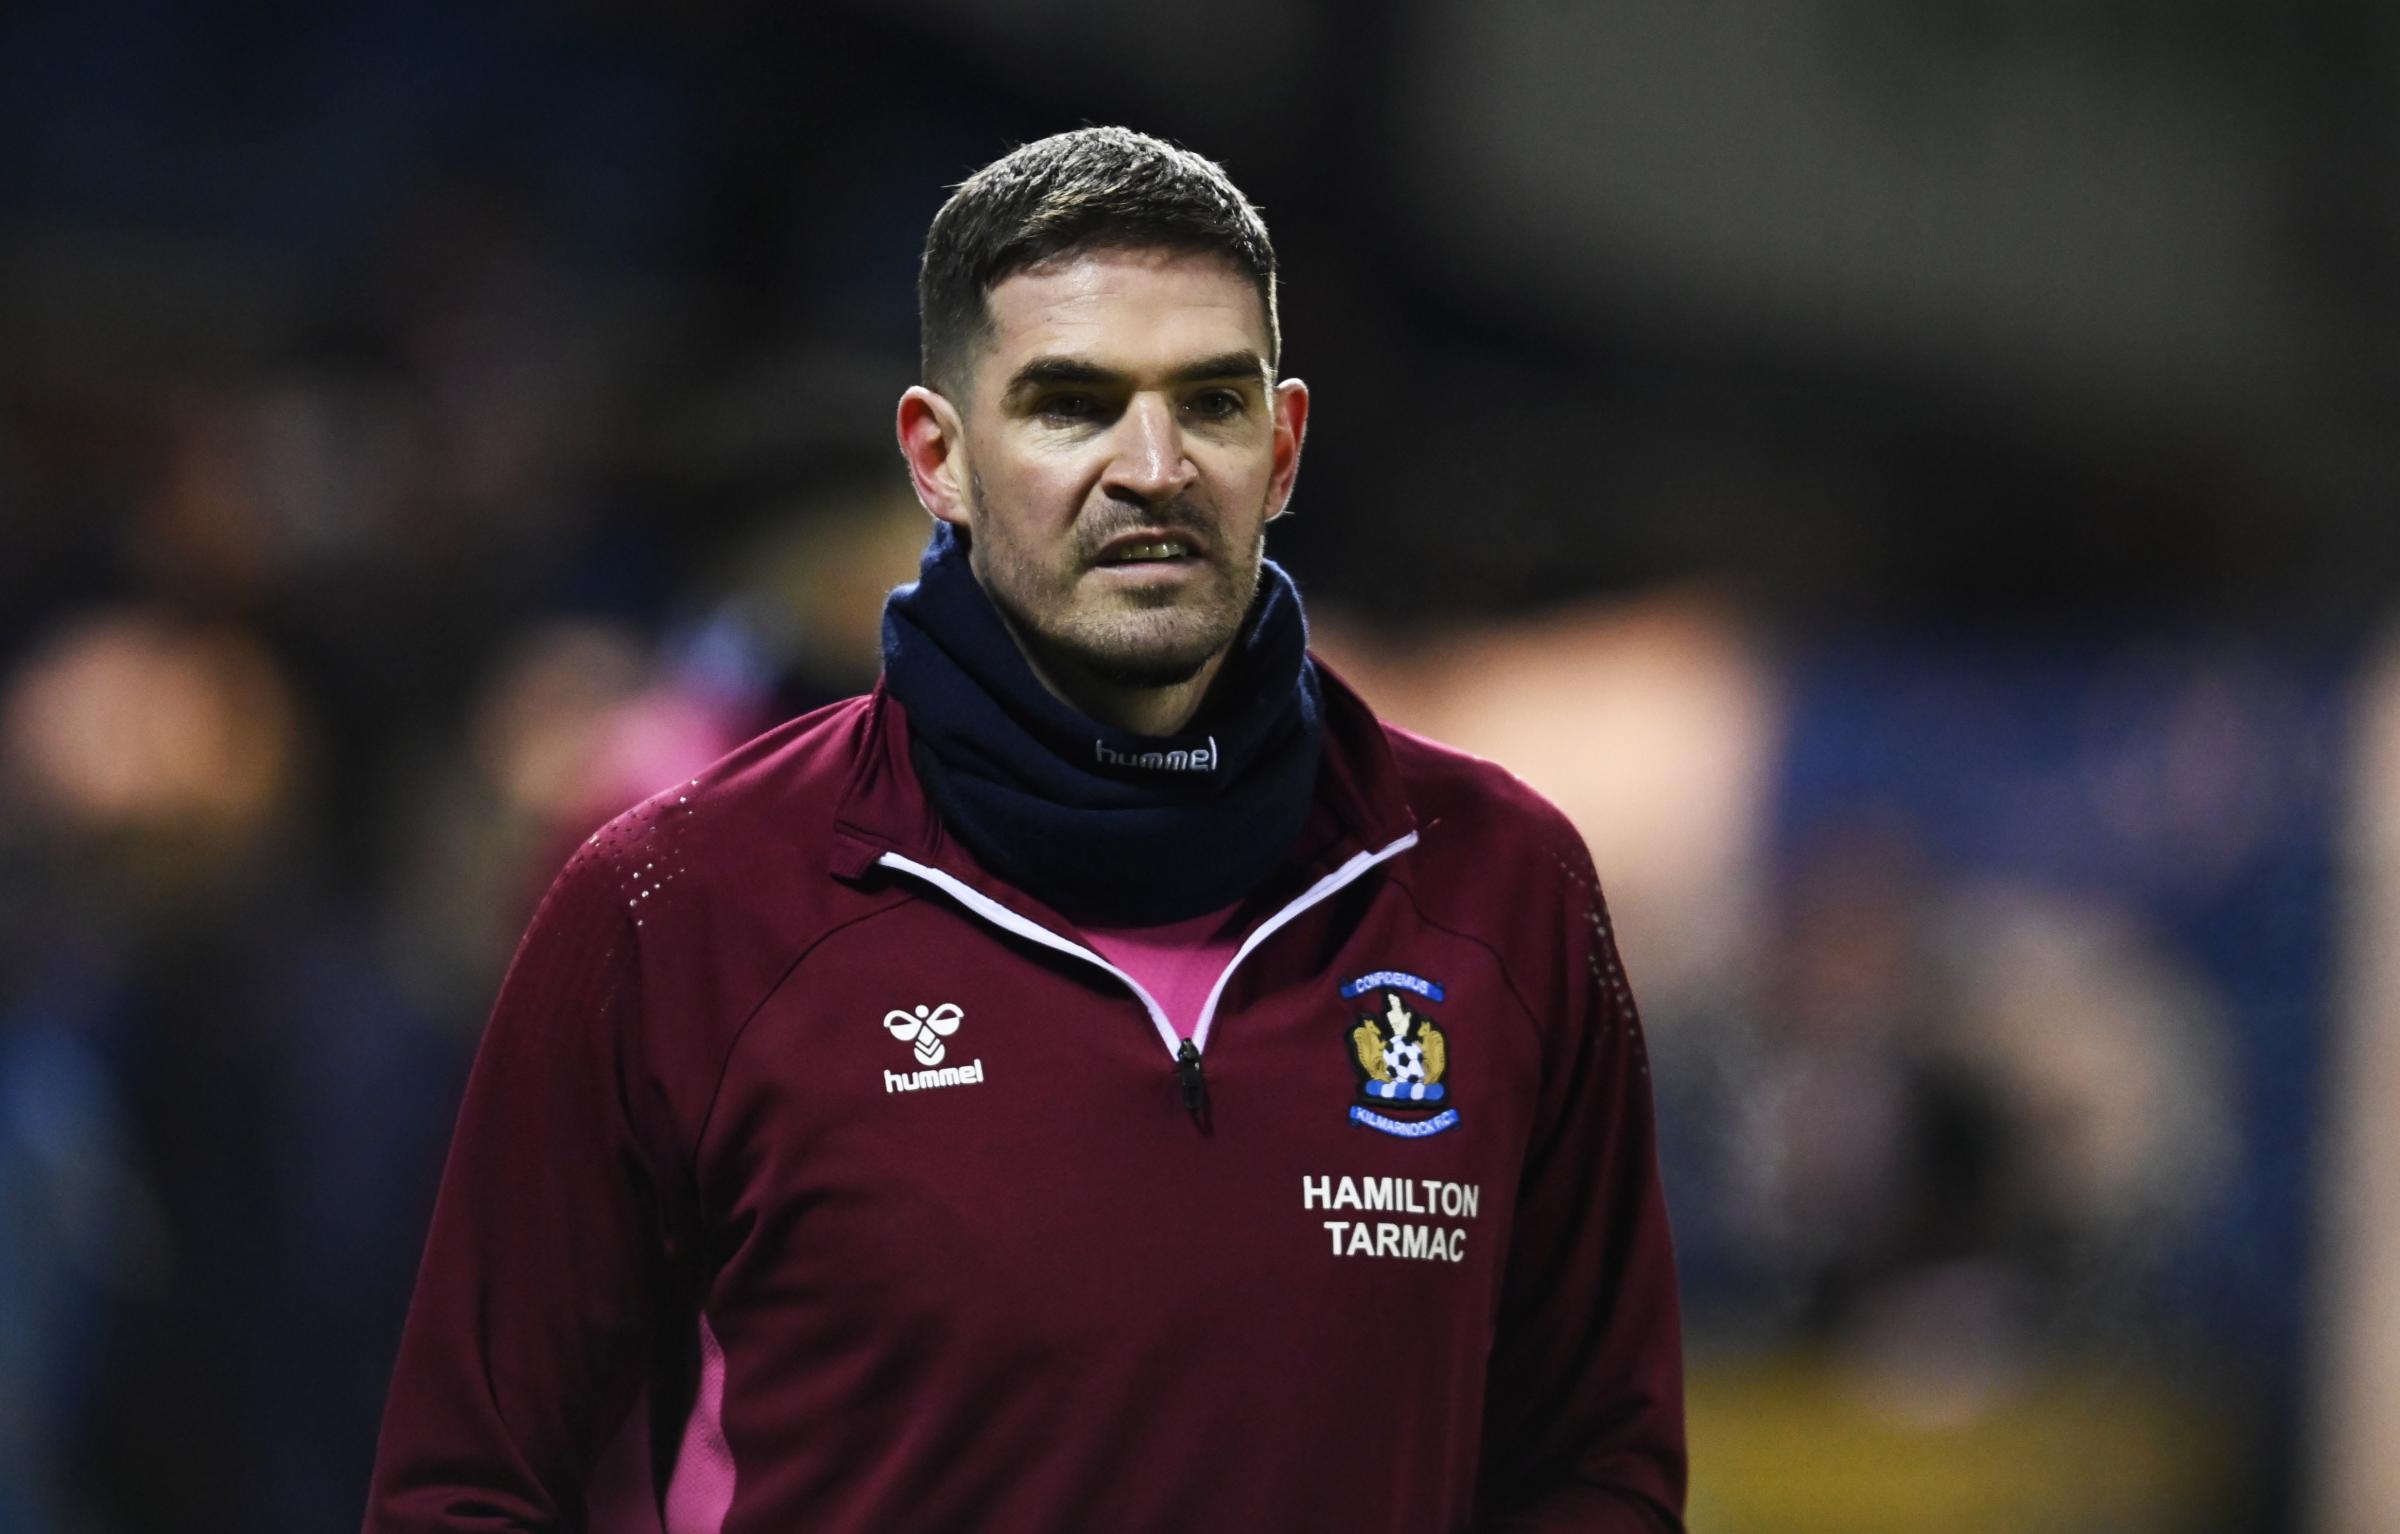 Kyle Lafferty disciplinary issue meant Kilmarnock ended contract